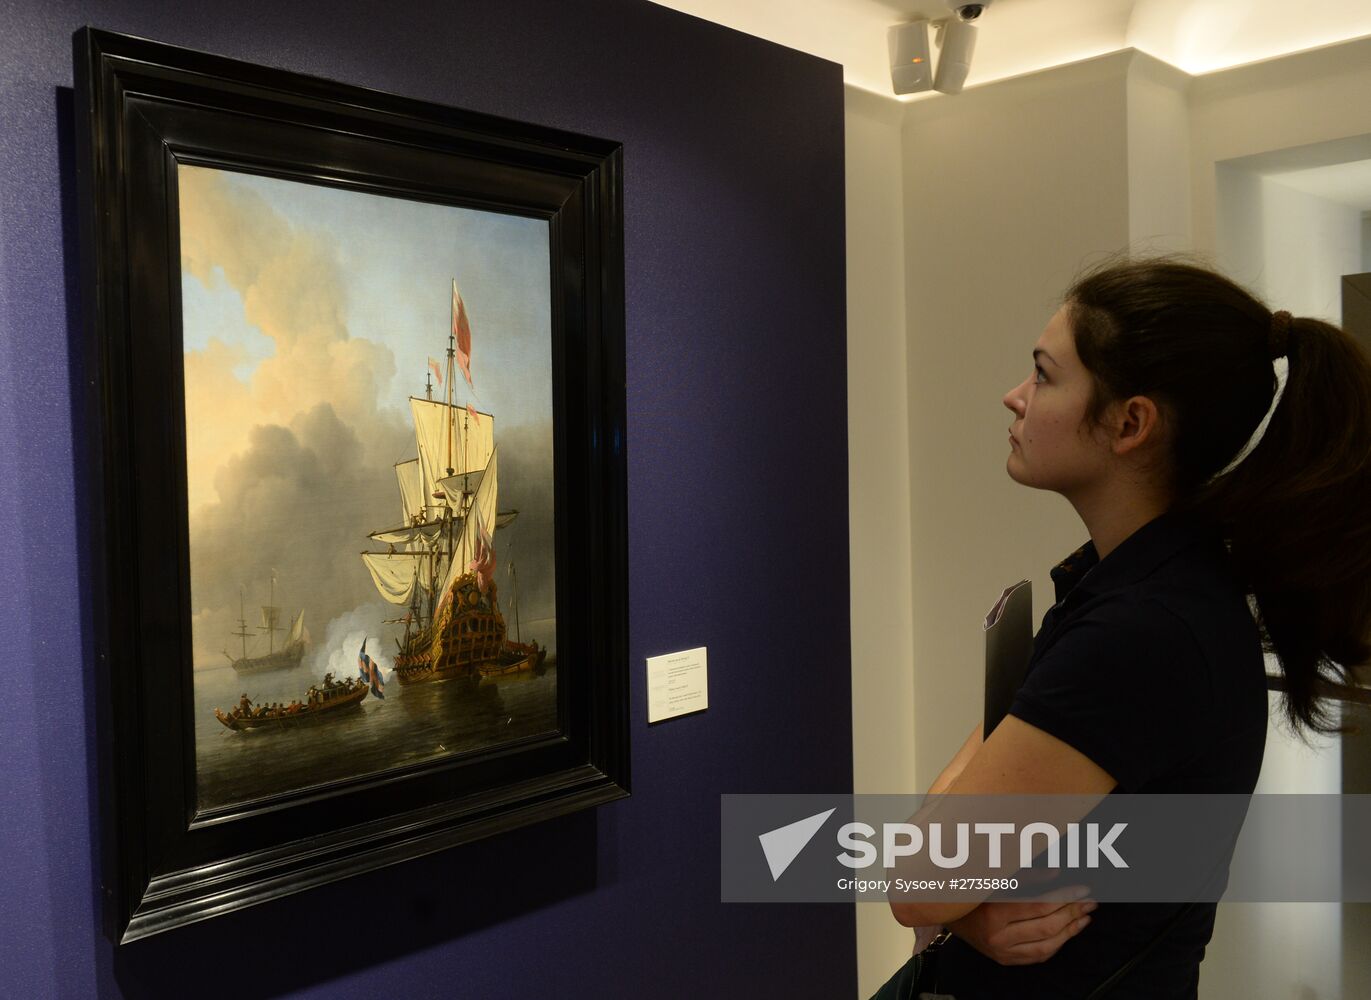 Christie's lots on display in Moscow